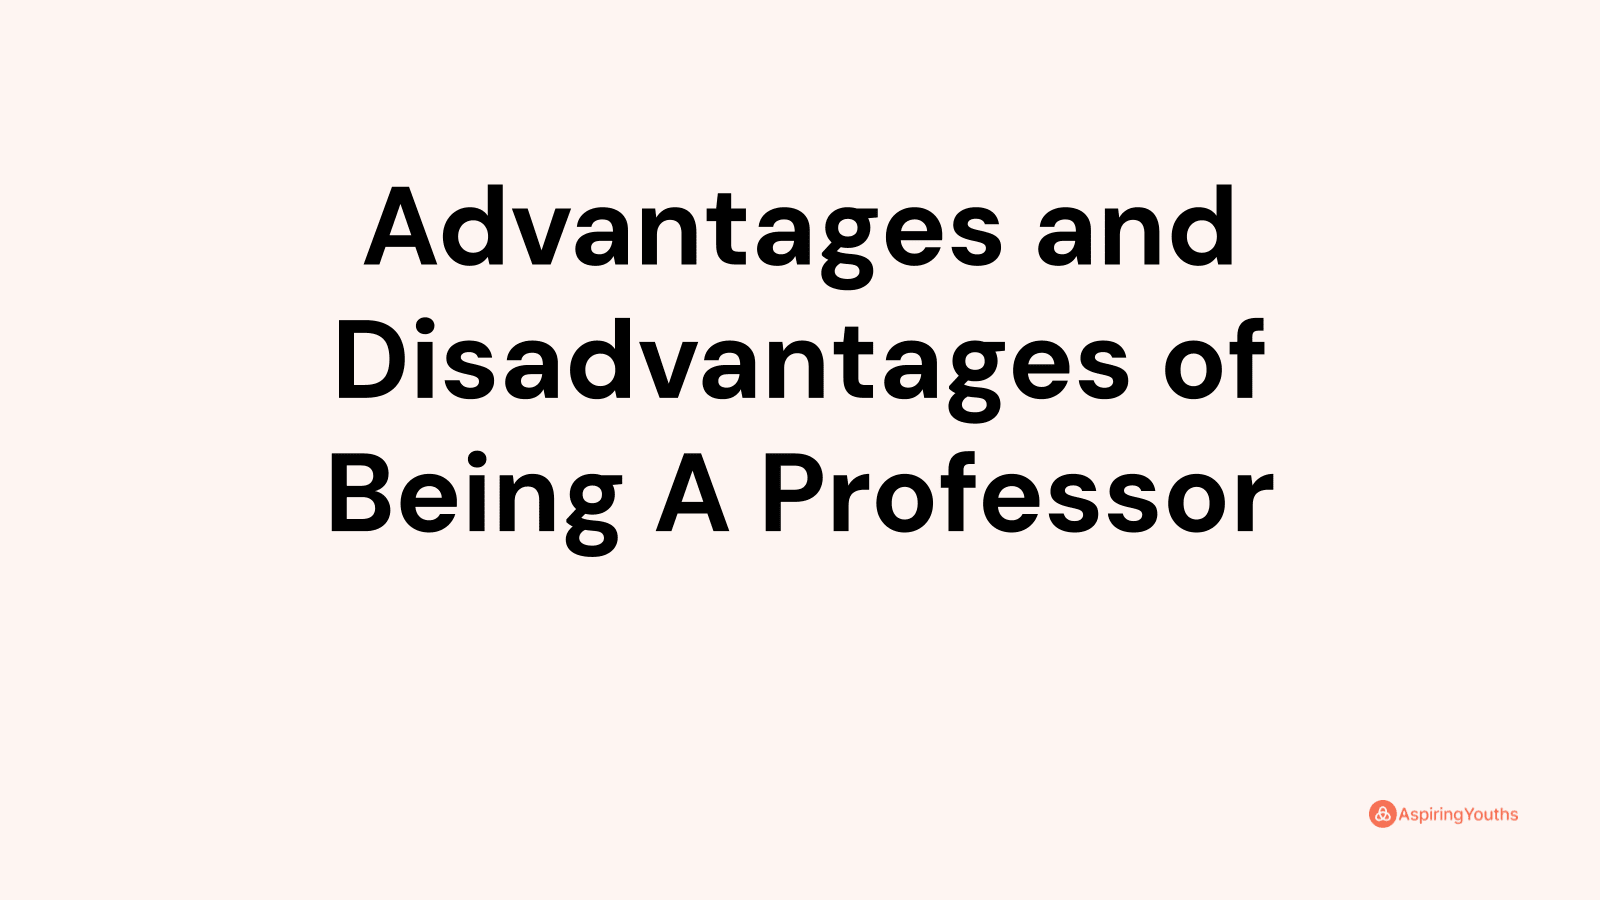 Advantages and disadvantages of Being A Professor